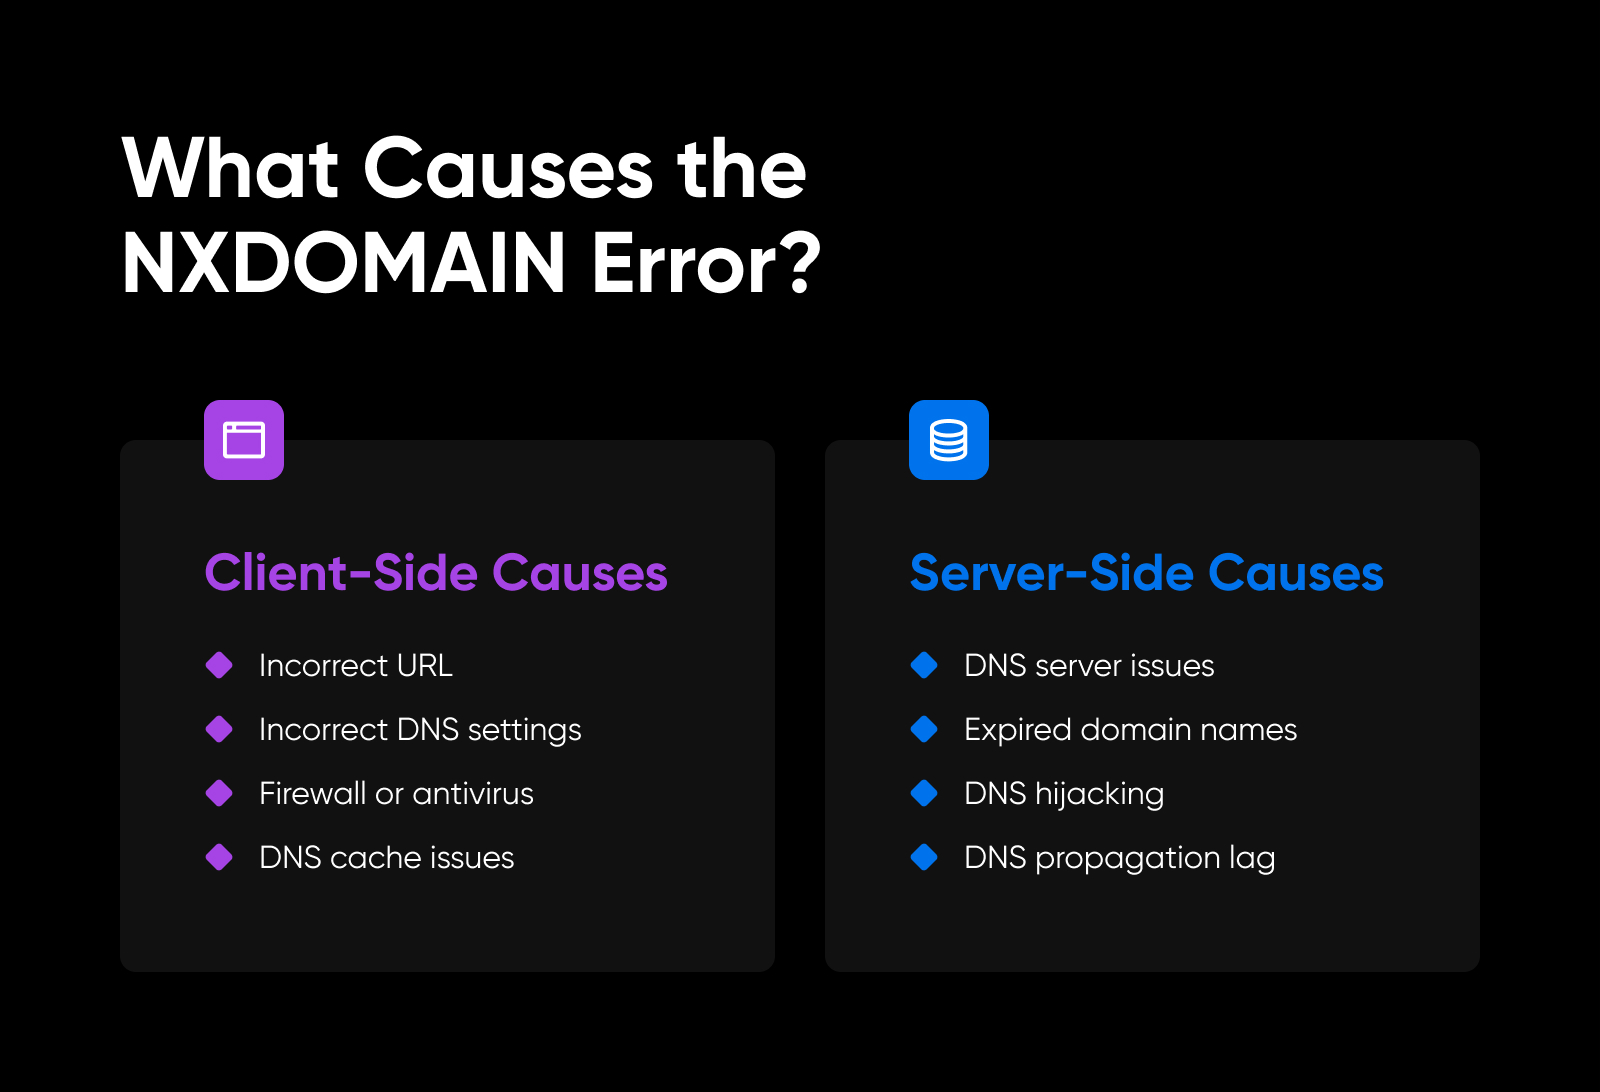 The Cause of The NXDOMAIN Error